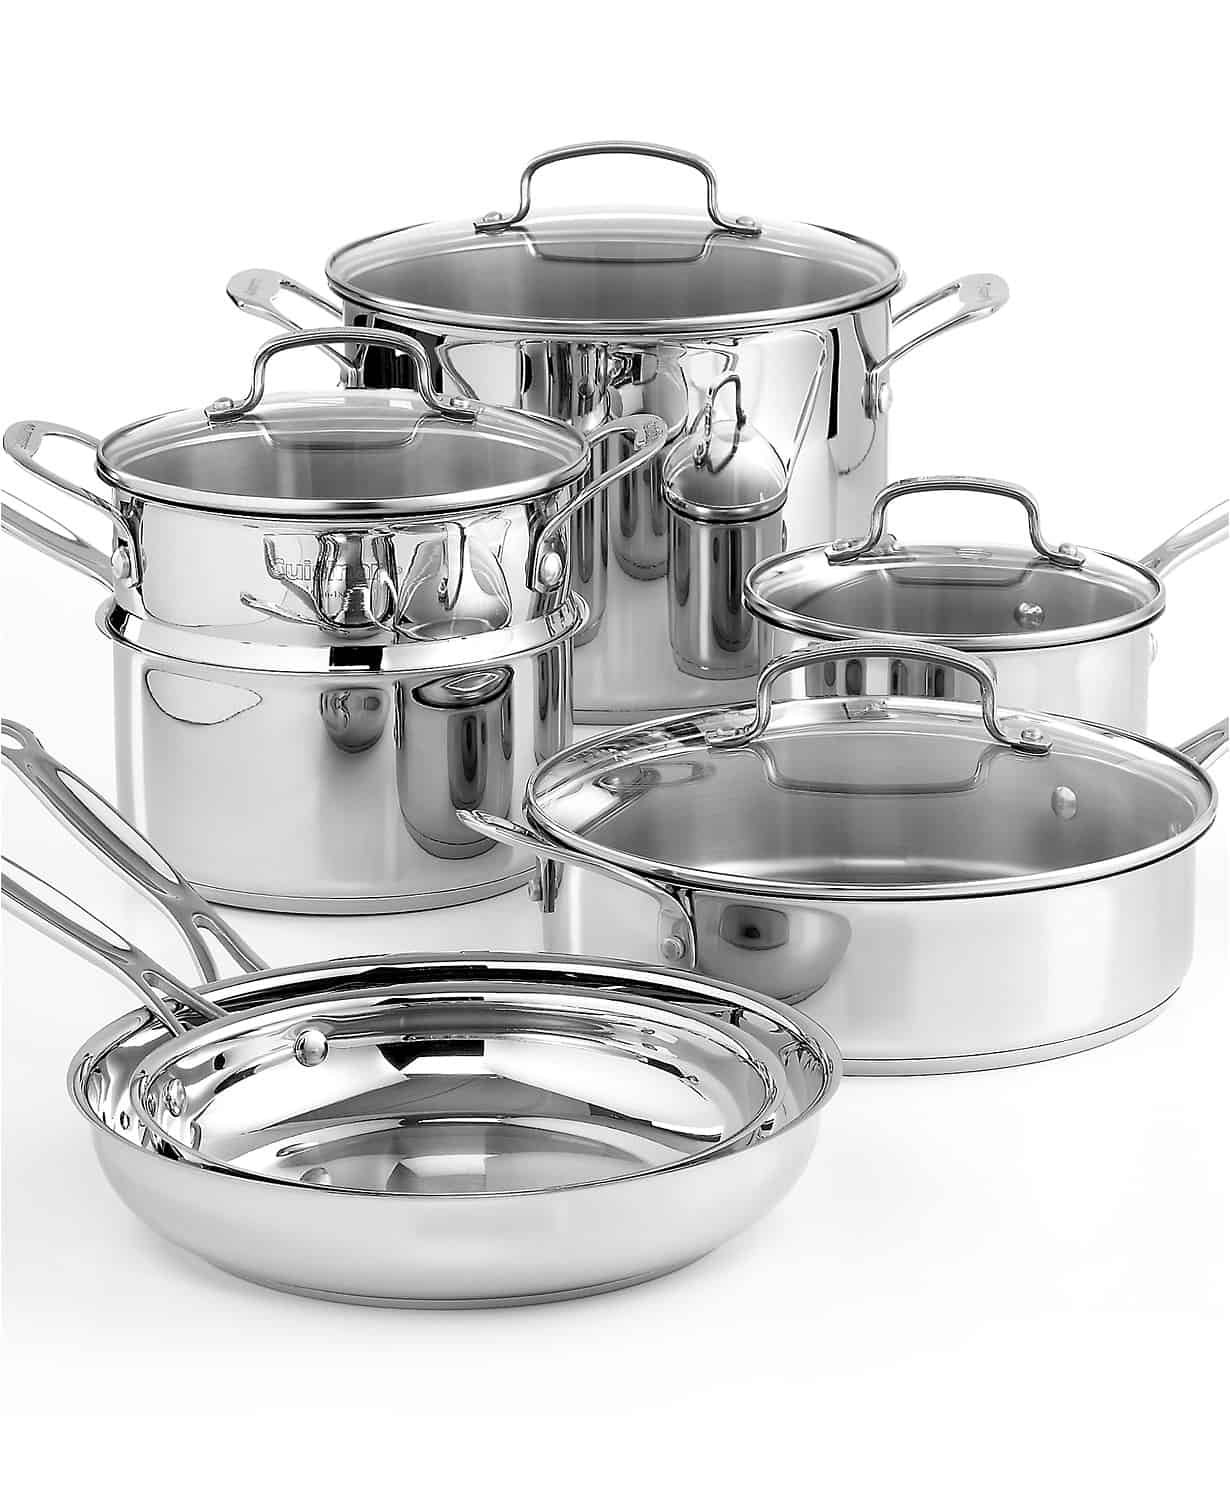 Macy’s – Cuisinart Chef’s Classic Stainless Steel 11pc Cookware Set + Bonus Gift ONLY $119.99